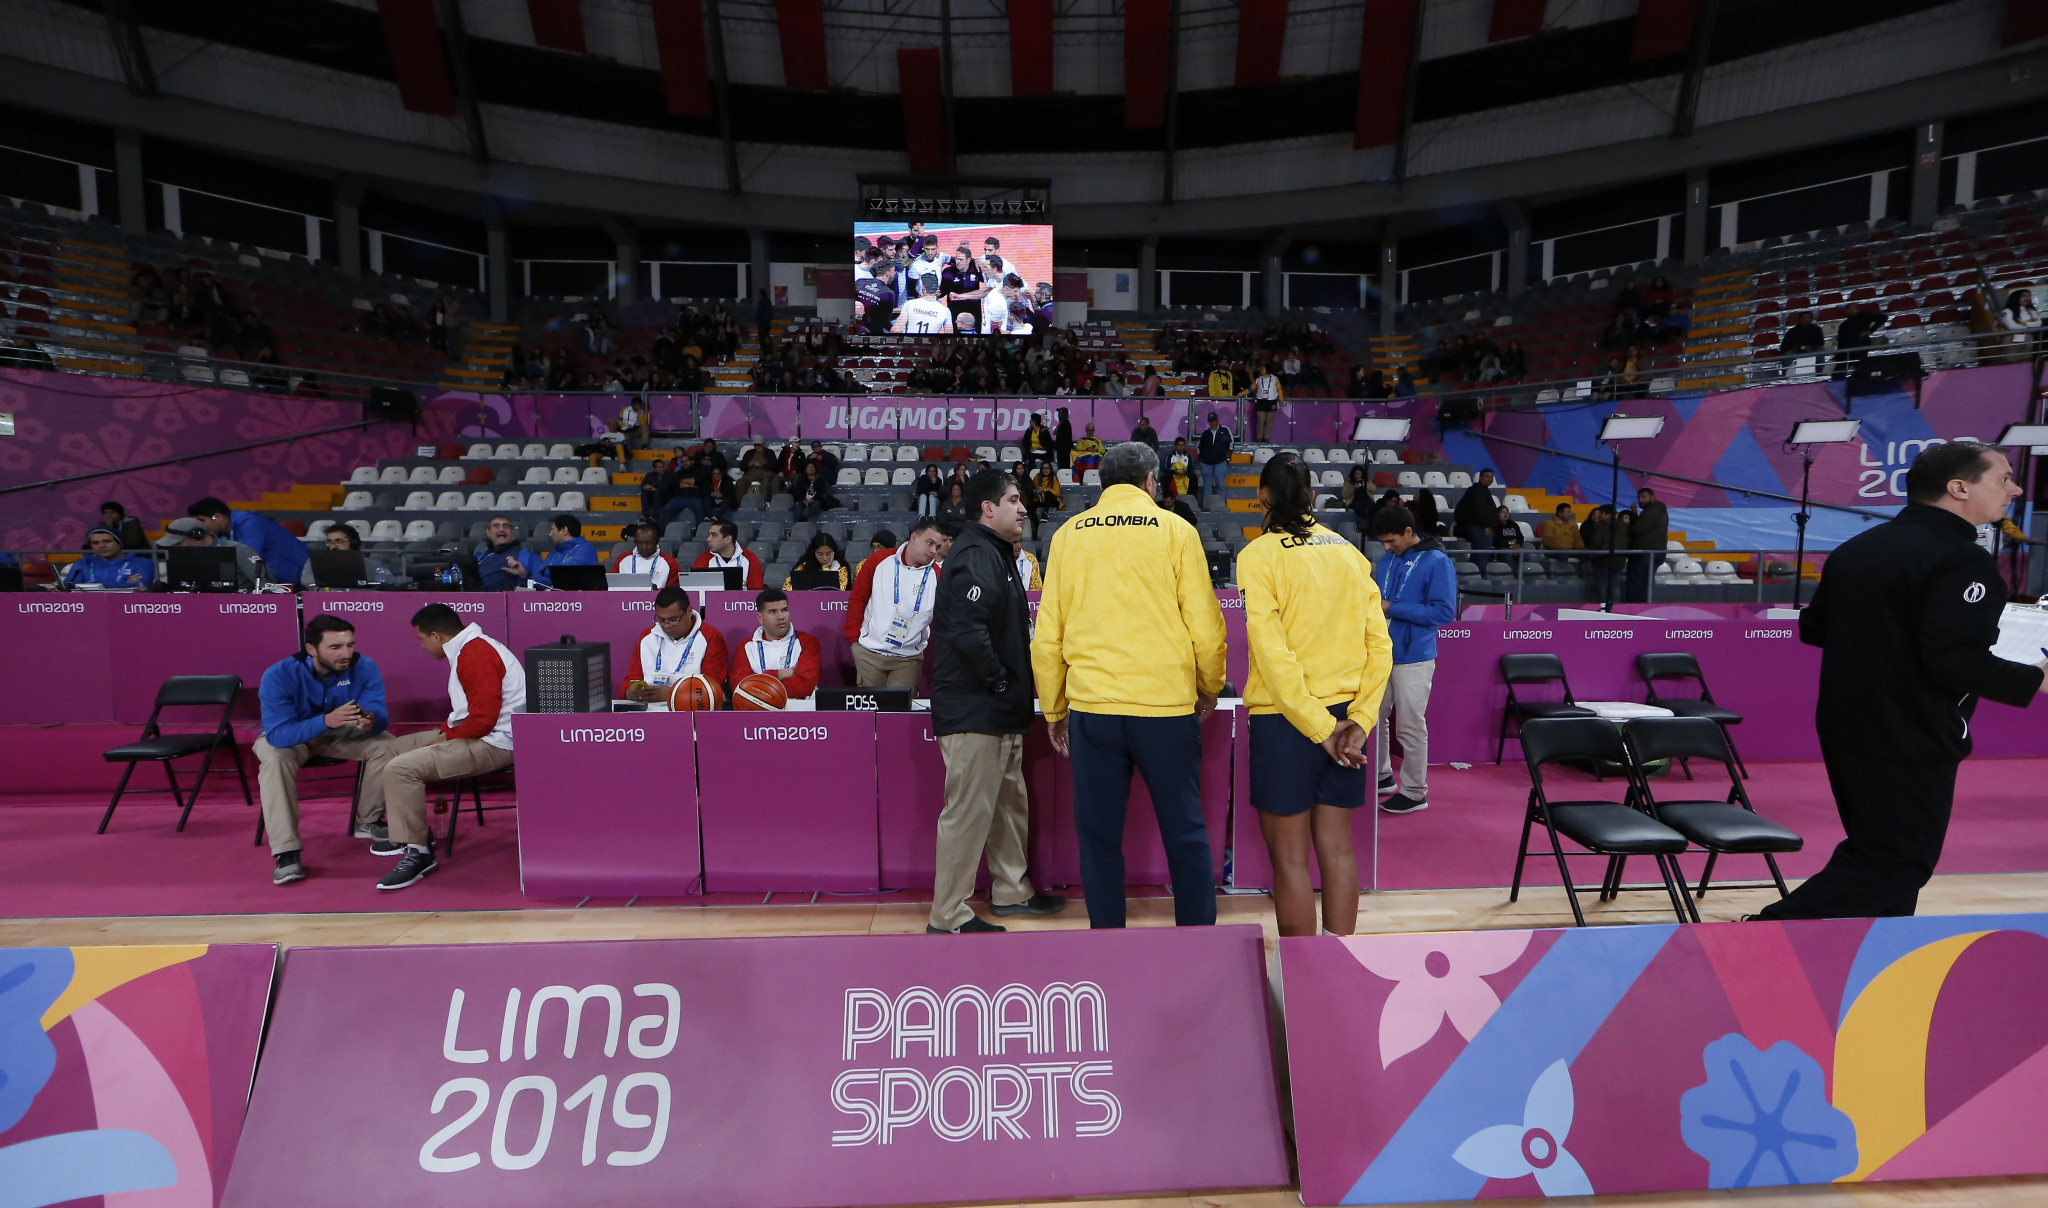 Colombia were awarded a walkover due to Argentina having the wrong kit ©Lima 2019